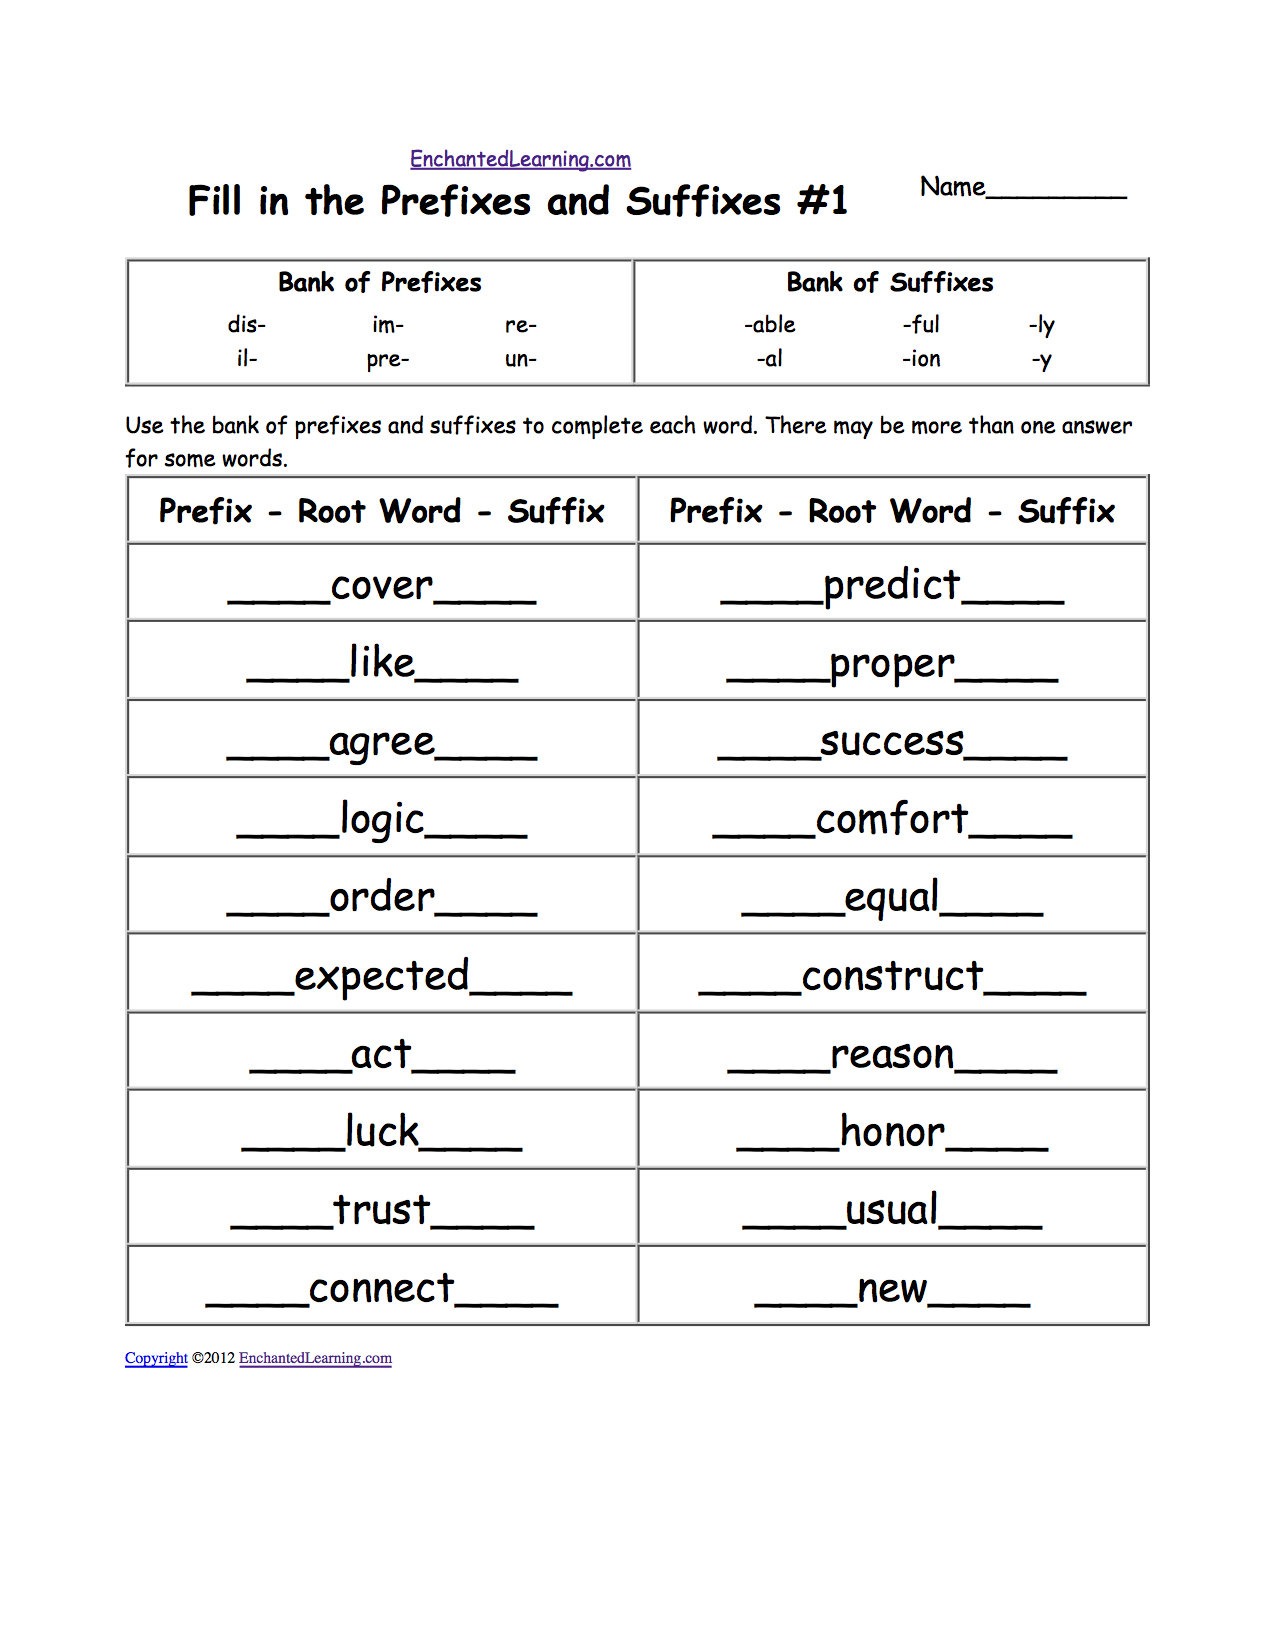 prefixes-and-suffixes-enchanted-learning